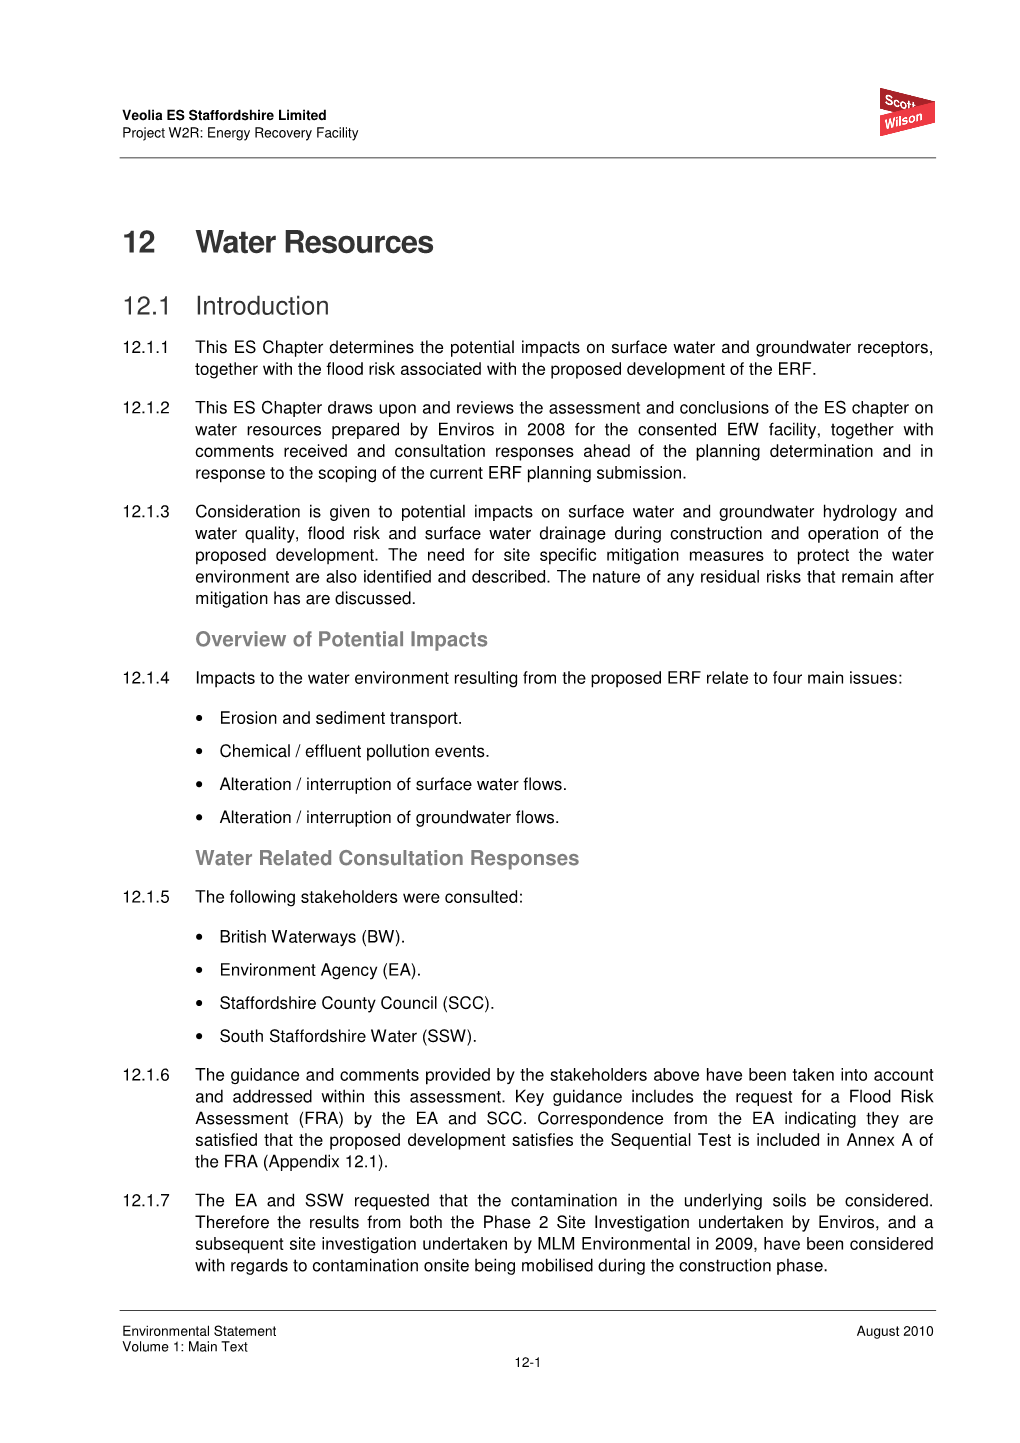 12 Water Resources